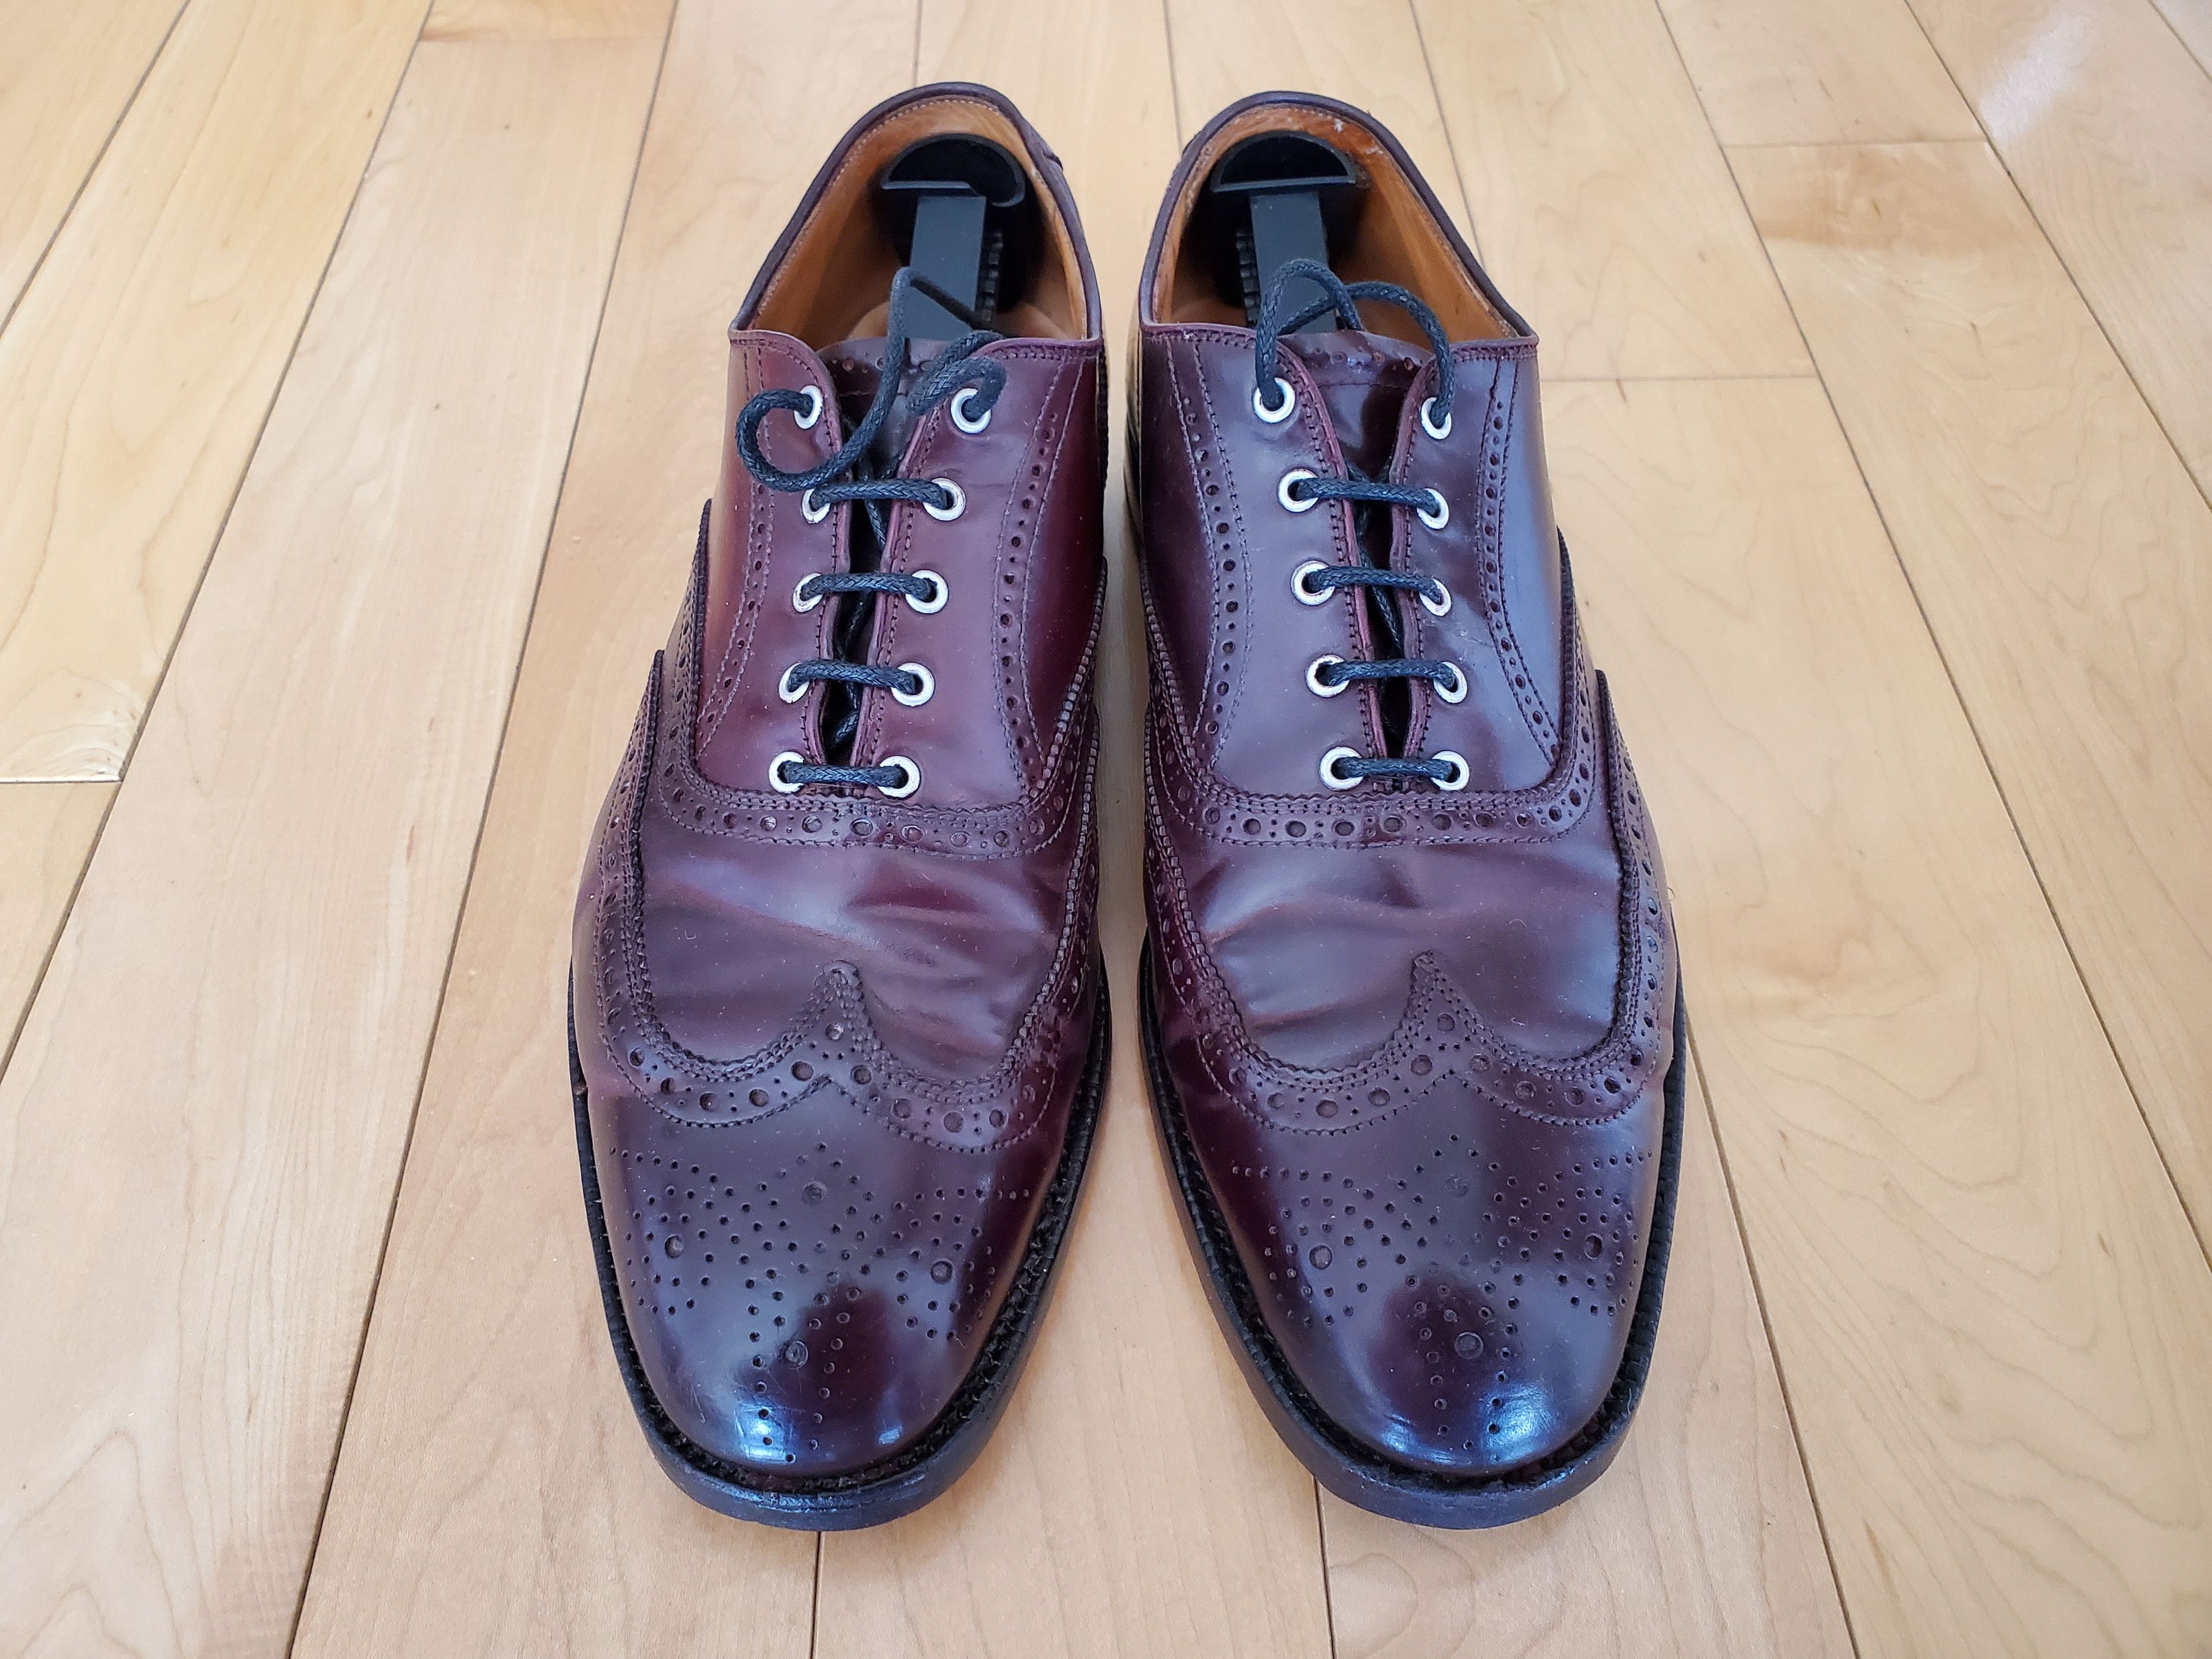 Alden x Brooks Brothers A764 Shell Cordovan Wingtip Balmoral | Grailed